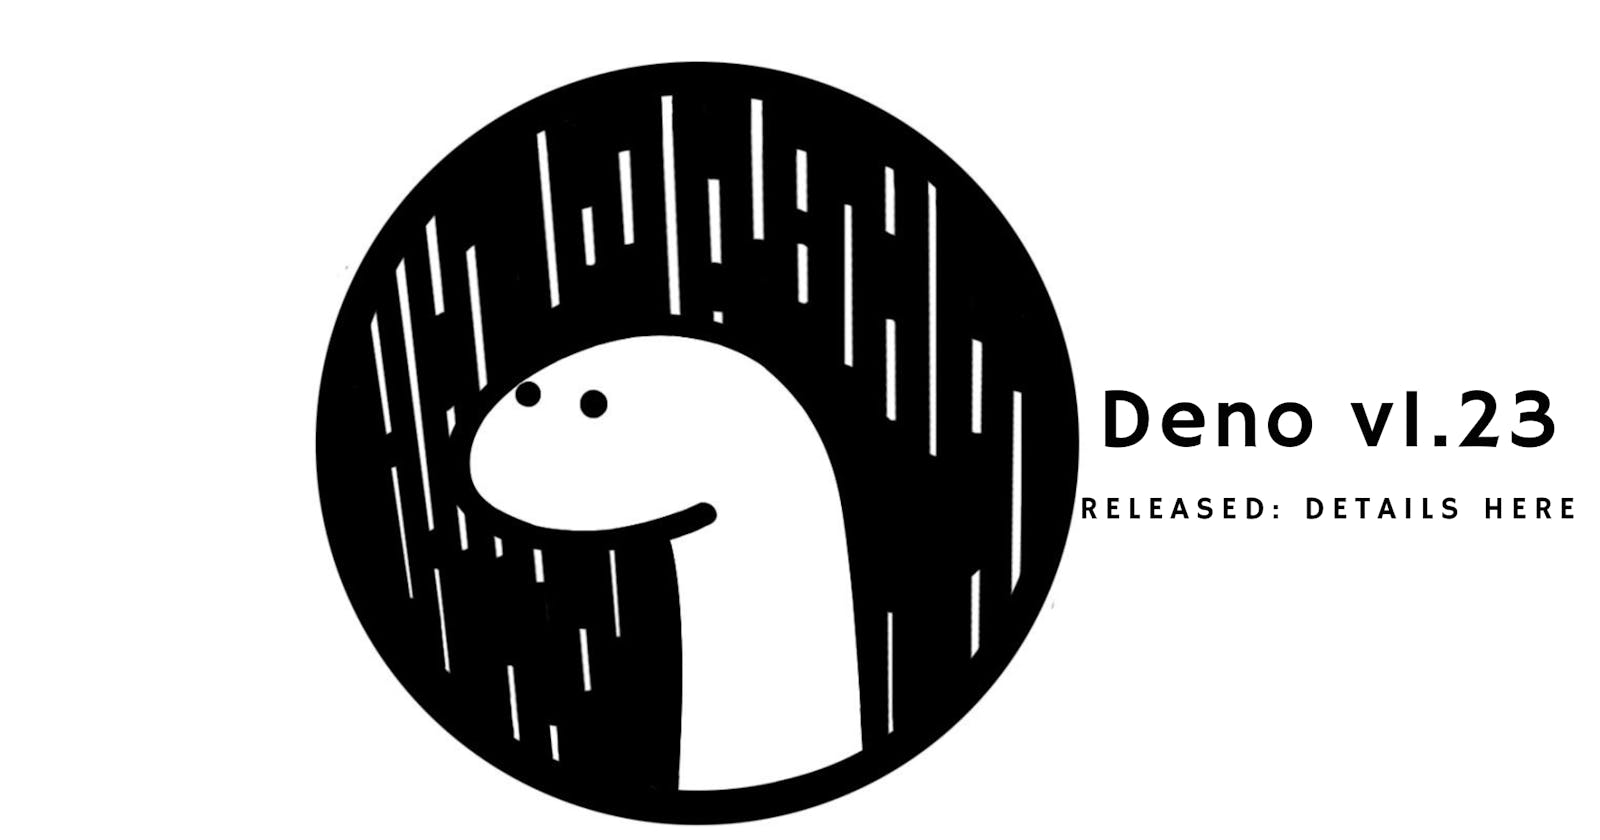 Deno v1.23 has been released: Details here